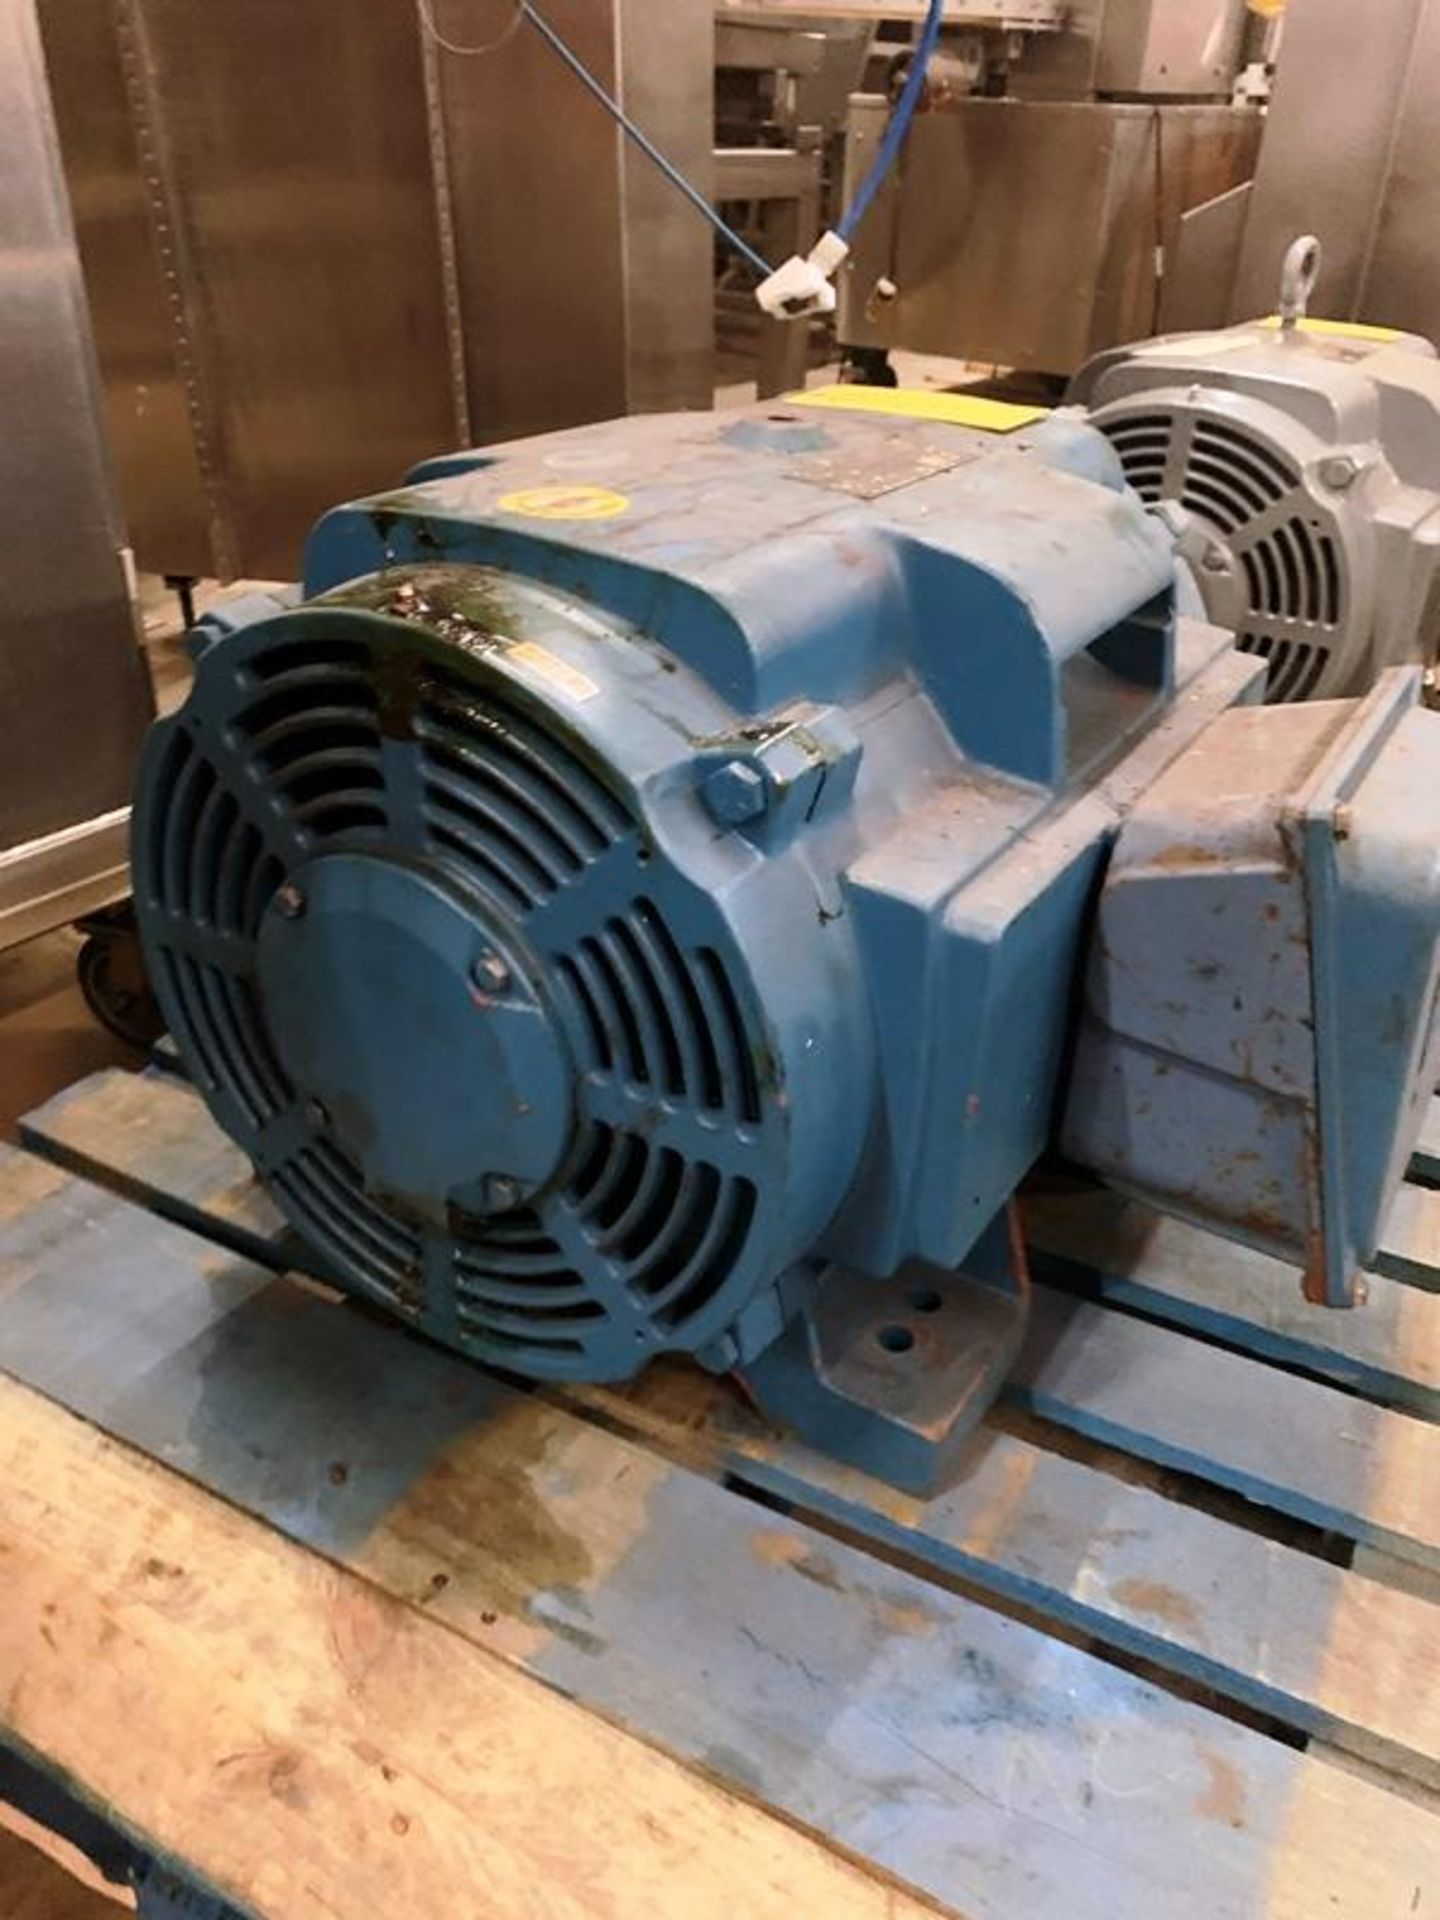 Used Motor, 75 h.p., 230/460 volts (Located in Sandwich, IL) - Image 4 of 4